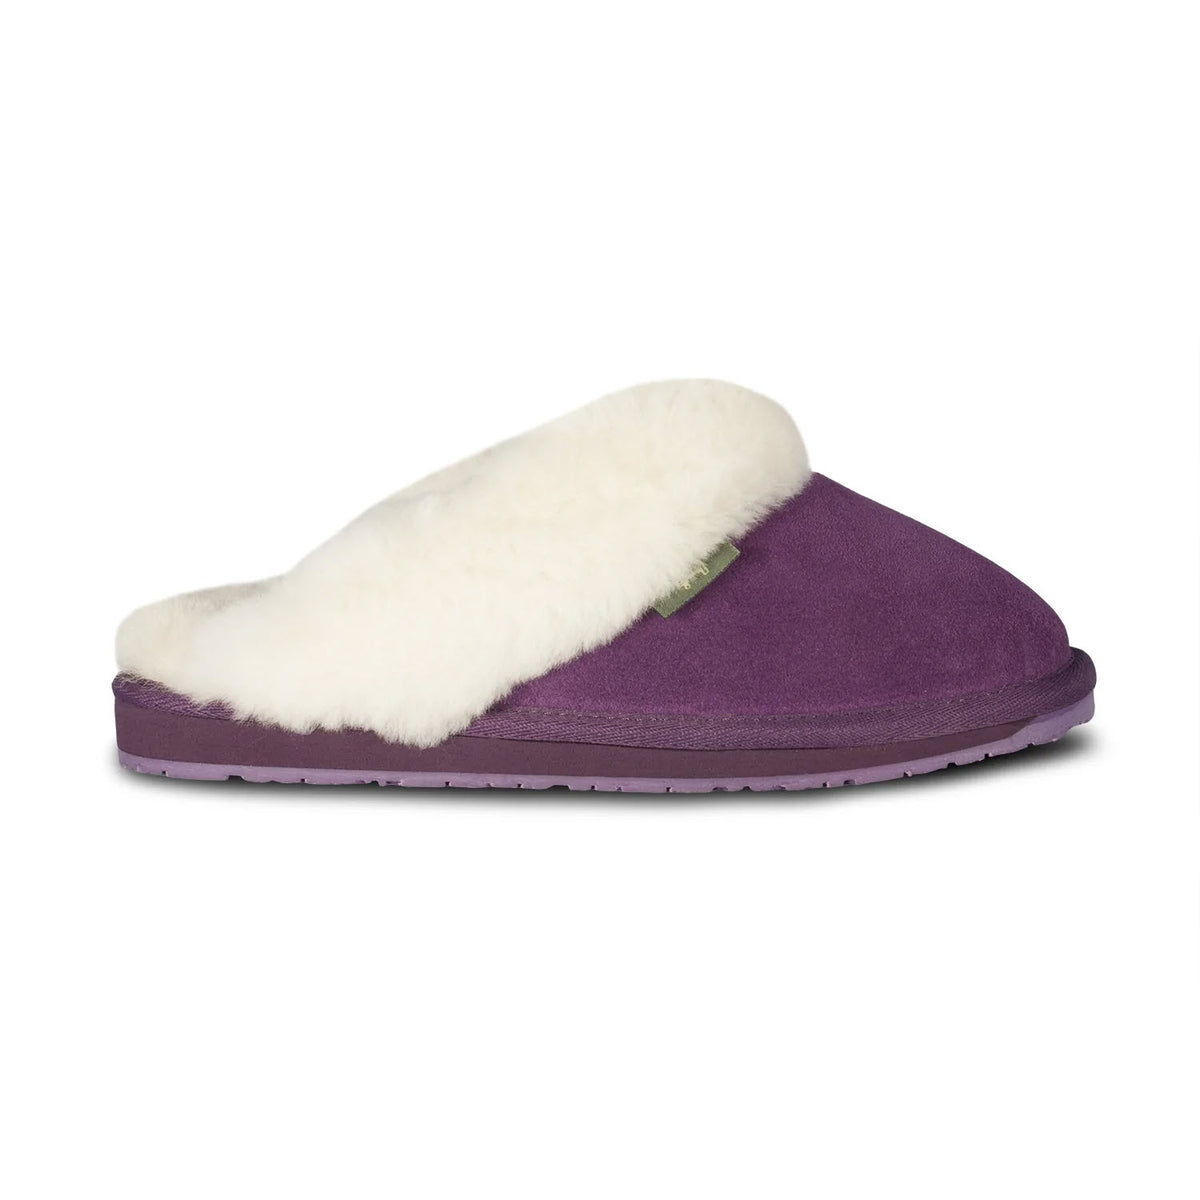 A purple &quot;Cloud Nine Ladies Scuff&quot; slipper with a white sheepskin lining and a thick rubber sole, photographed against a white background.